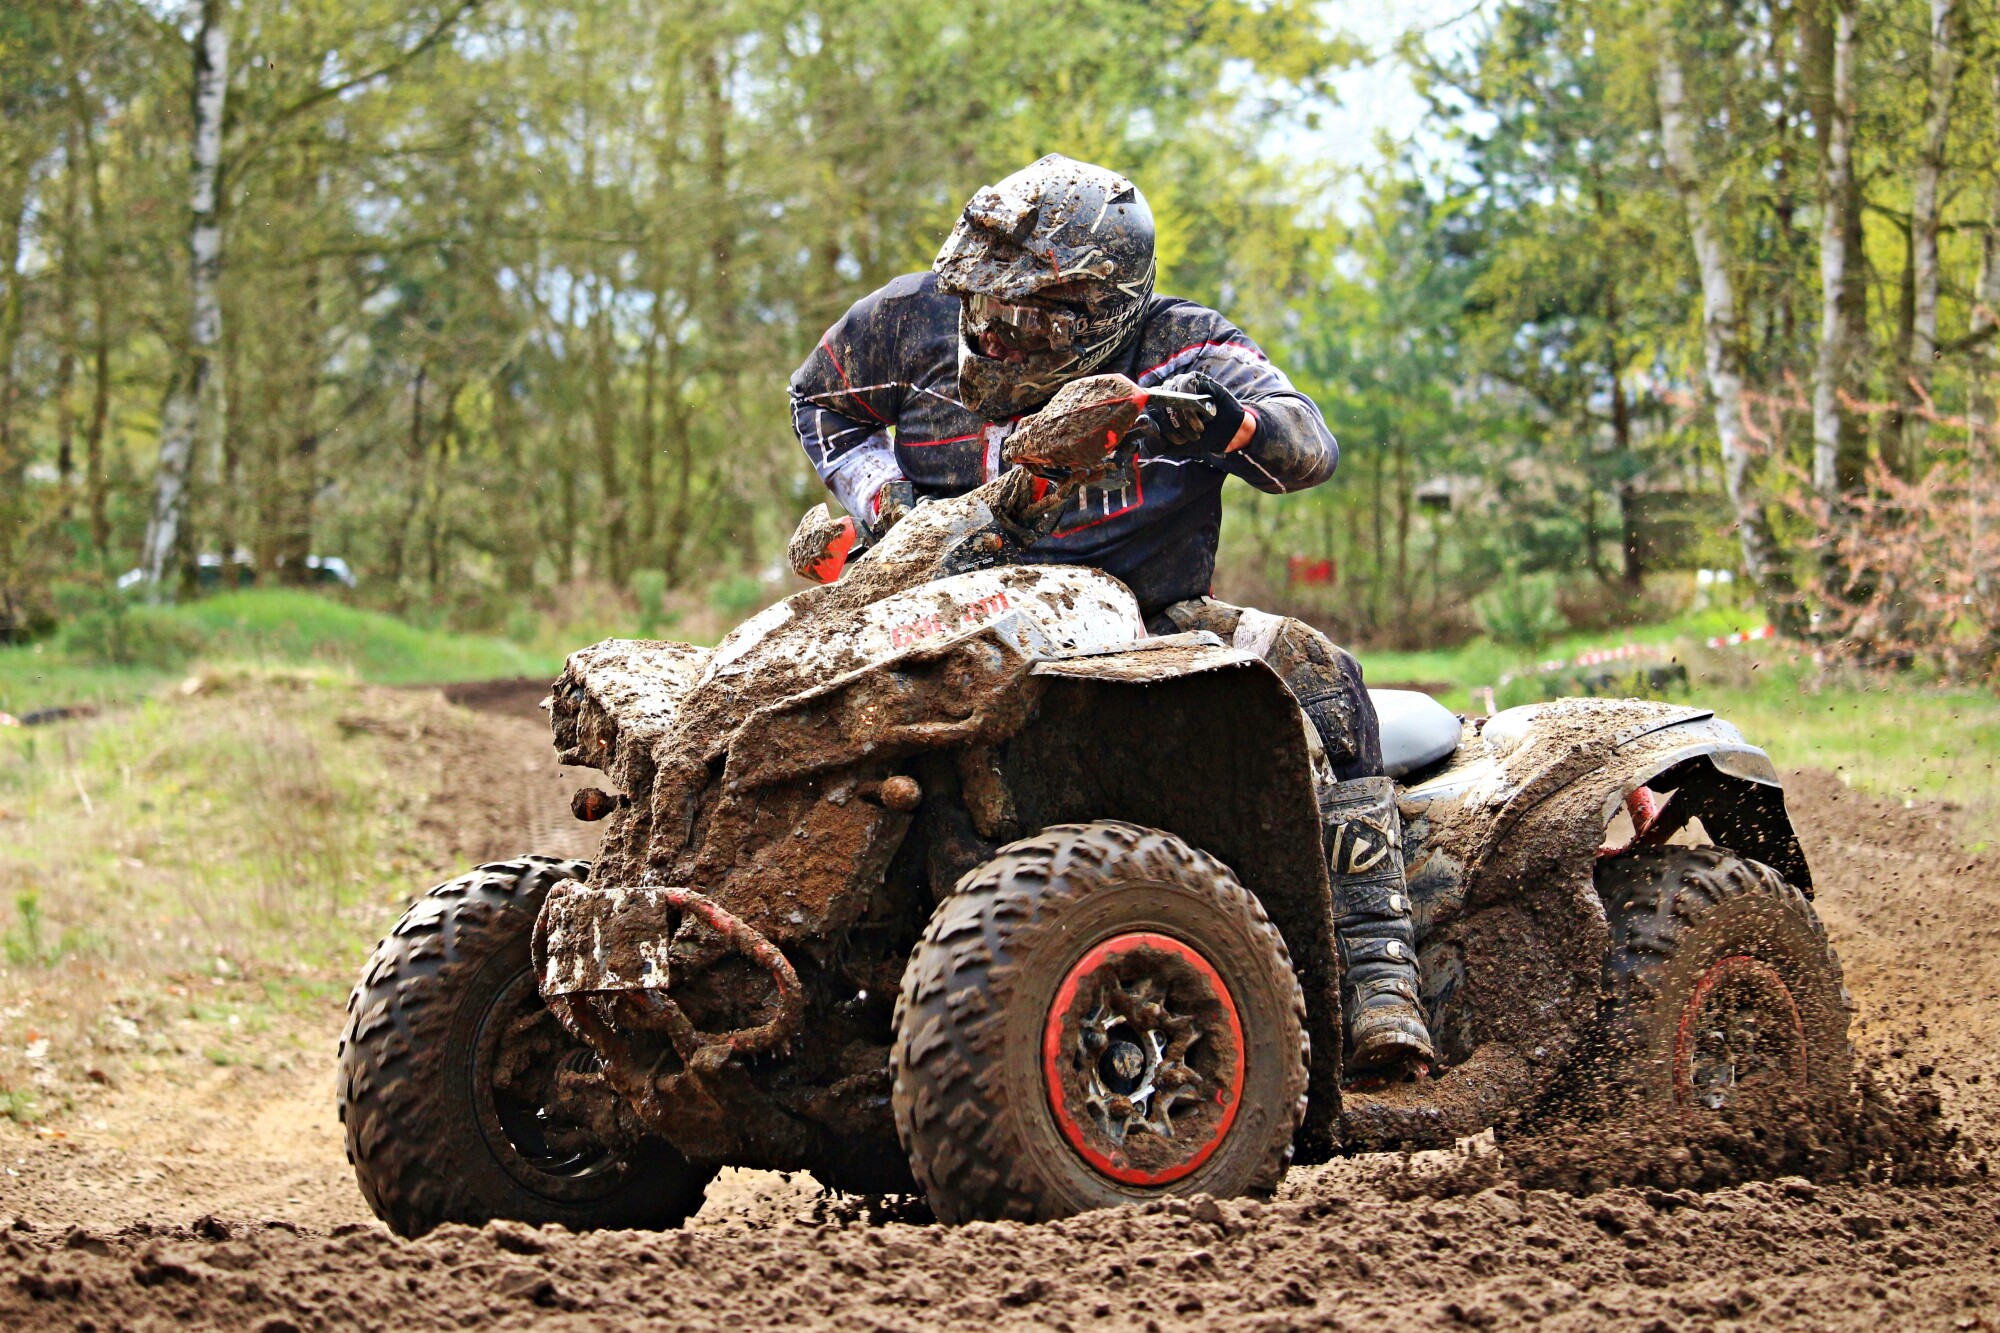 ATV Motorcycles for Beginners